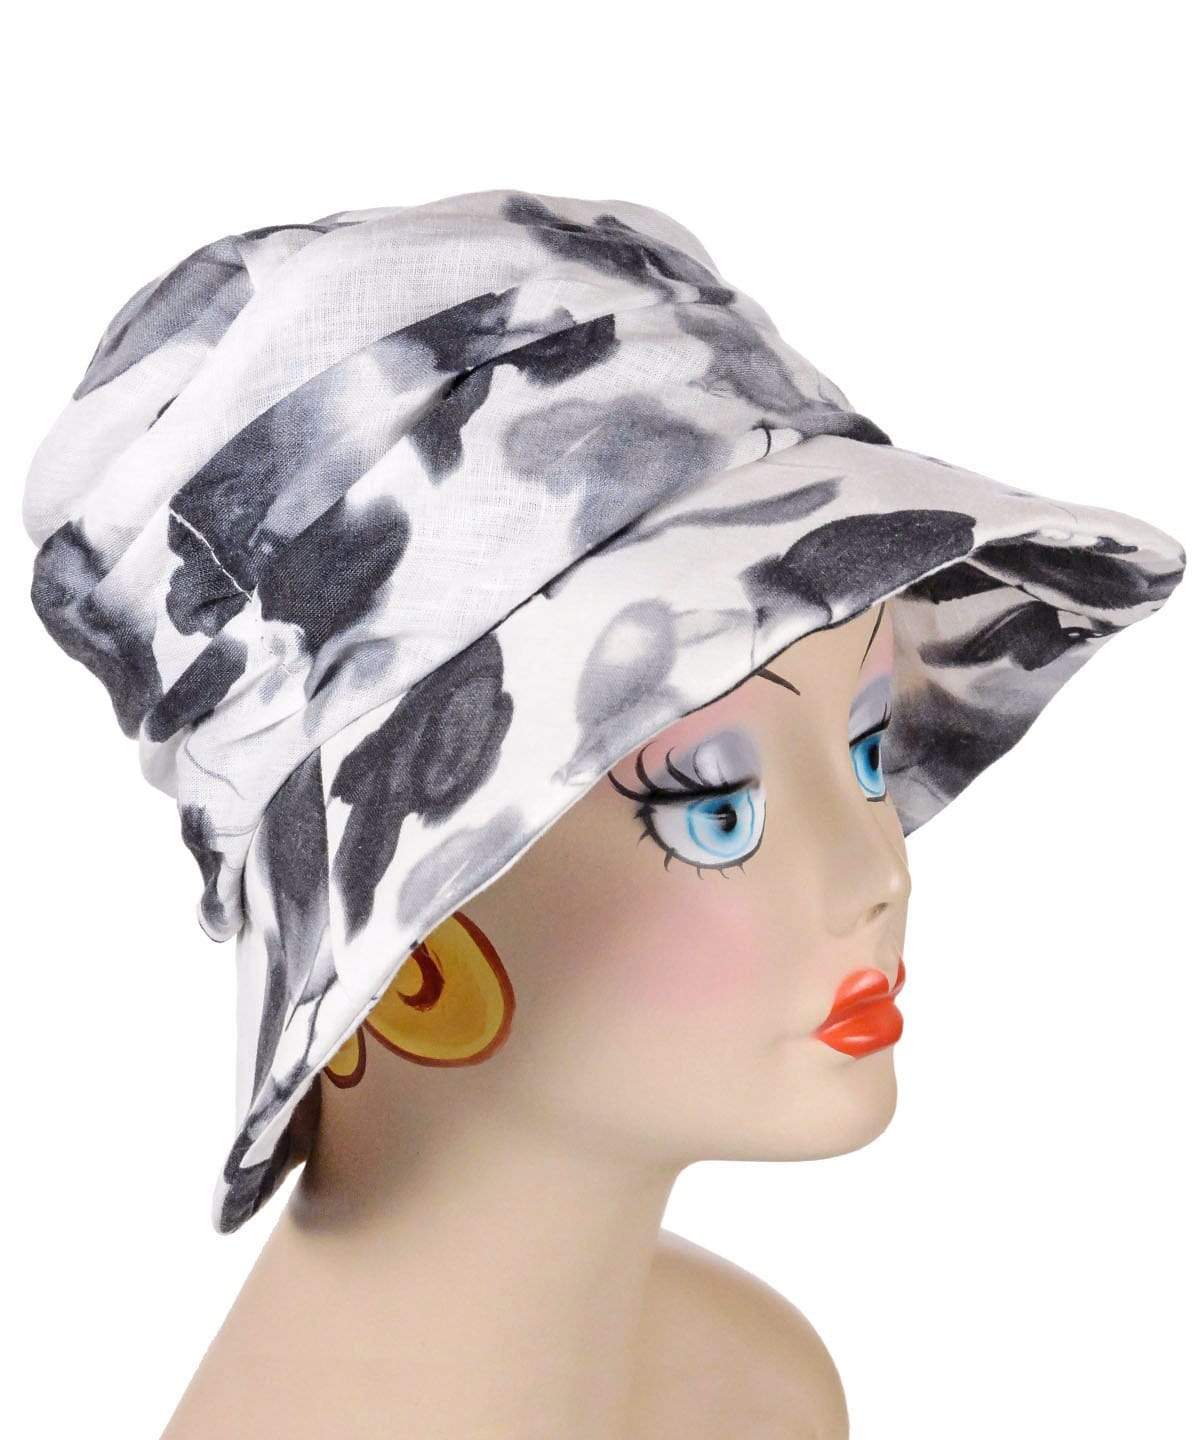 Krystyne Bucket Hat in Black and White Floral Linen Handmade in Seattle WA by Pandemonium Millinery USA